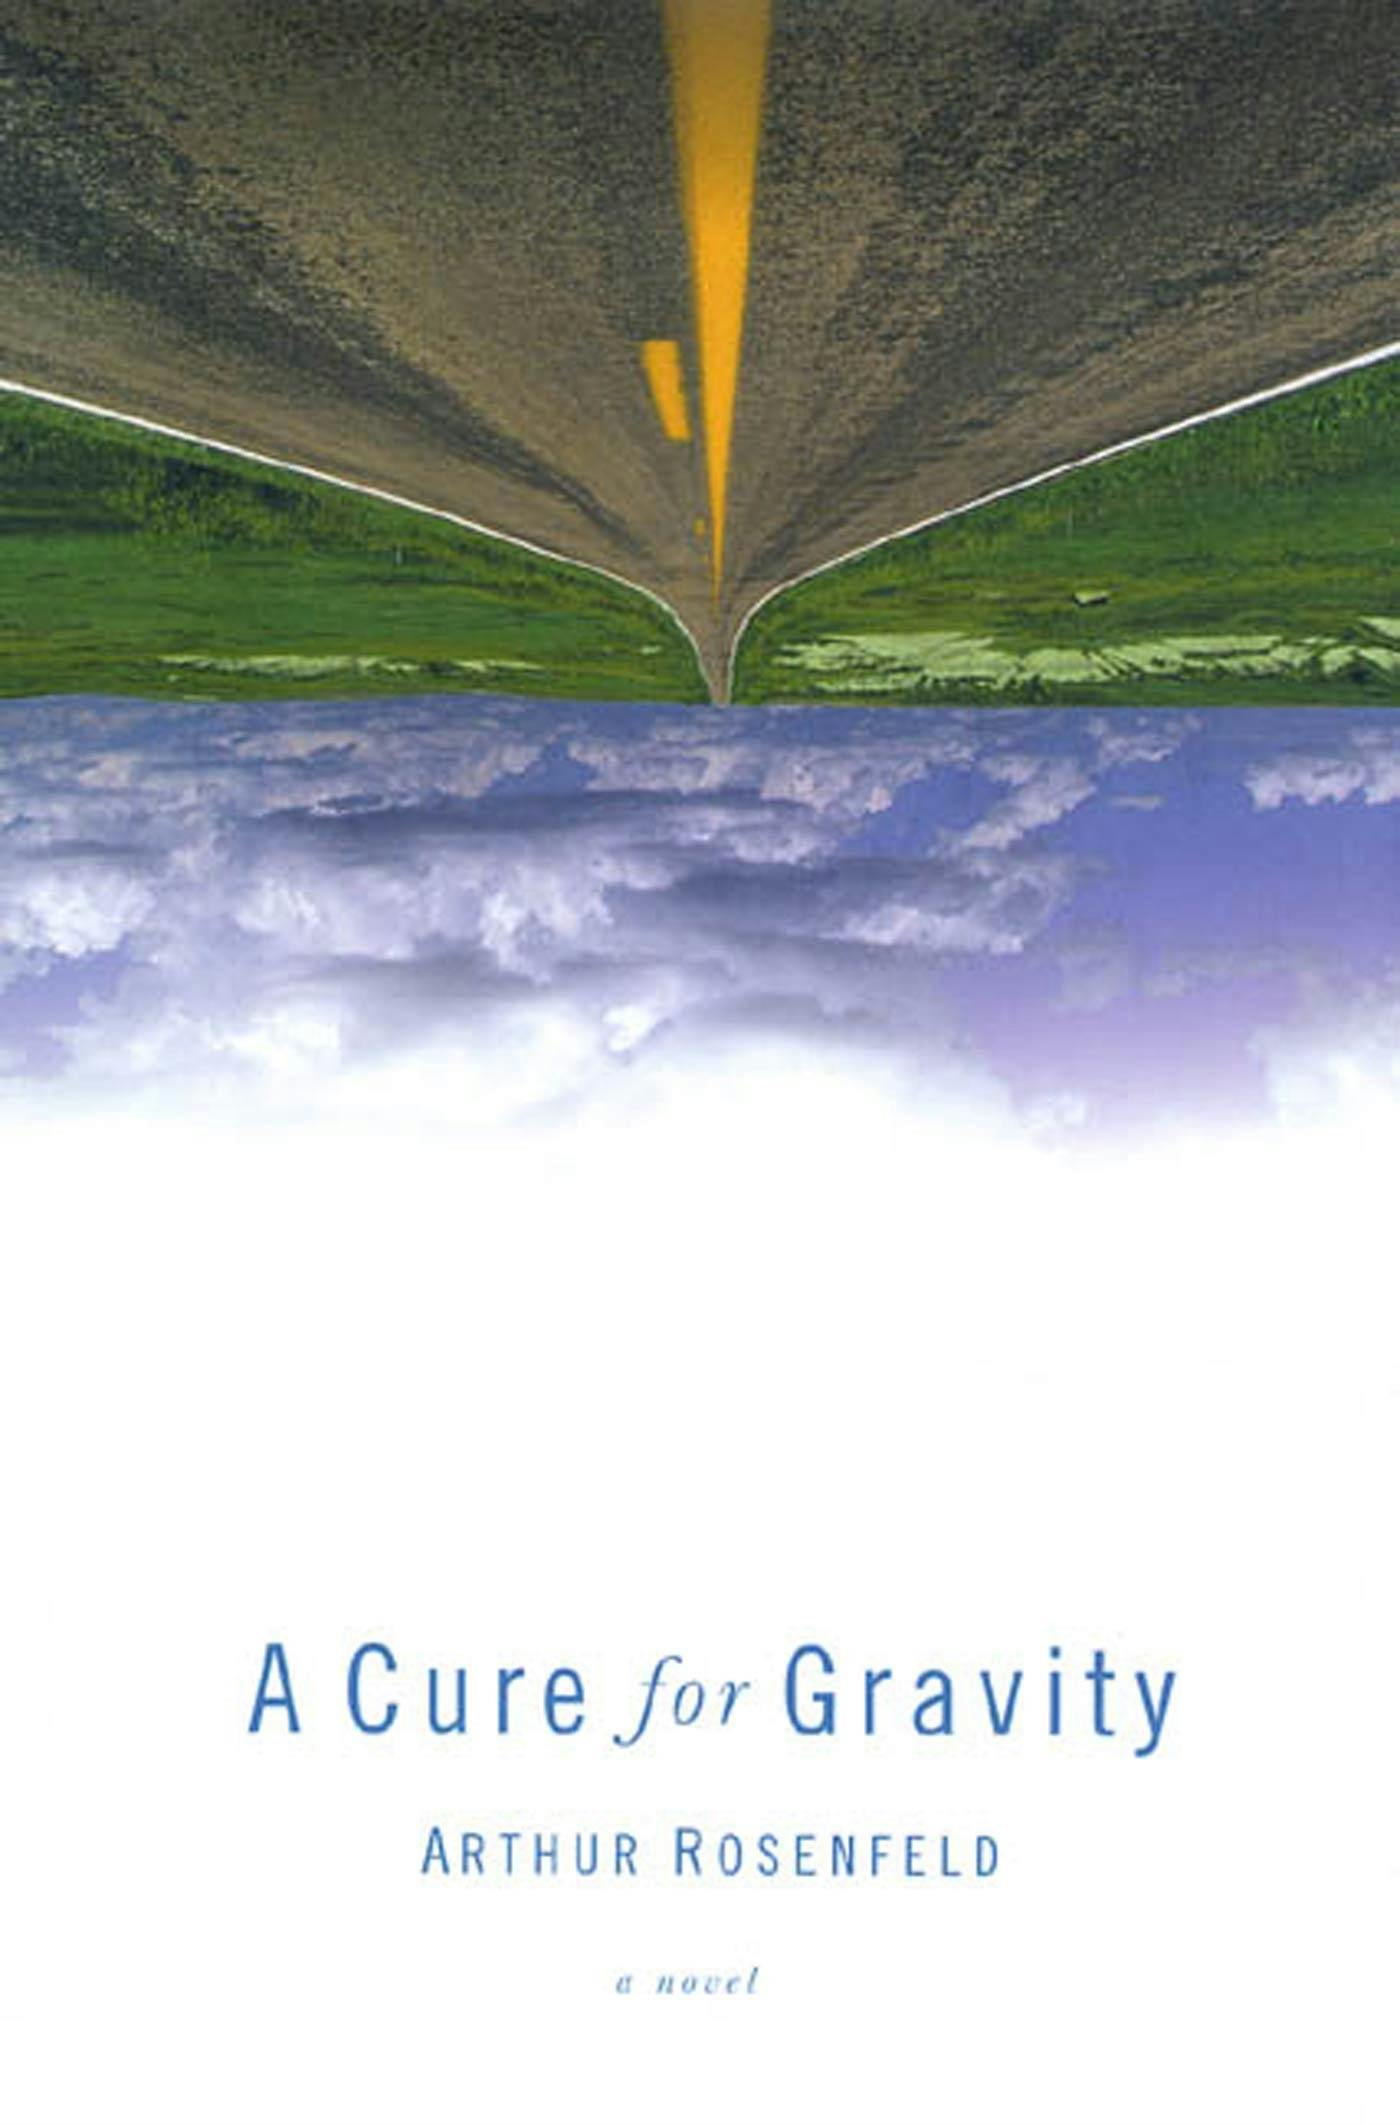 Cover for the book titled as: A Cure for Gravity